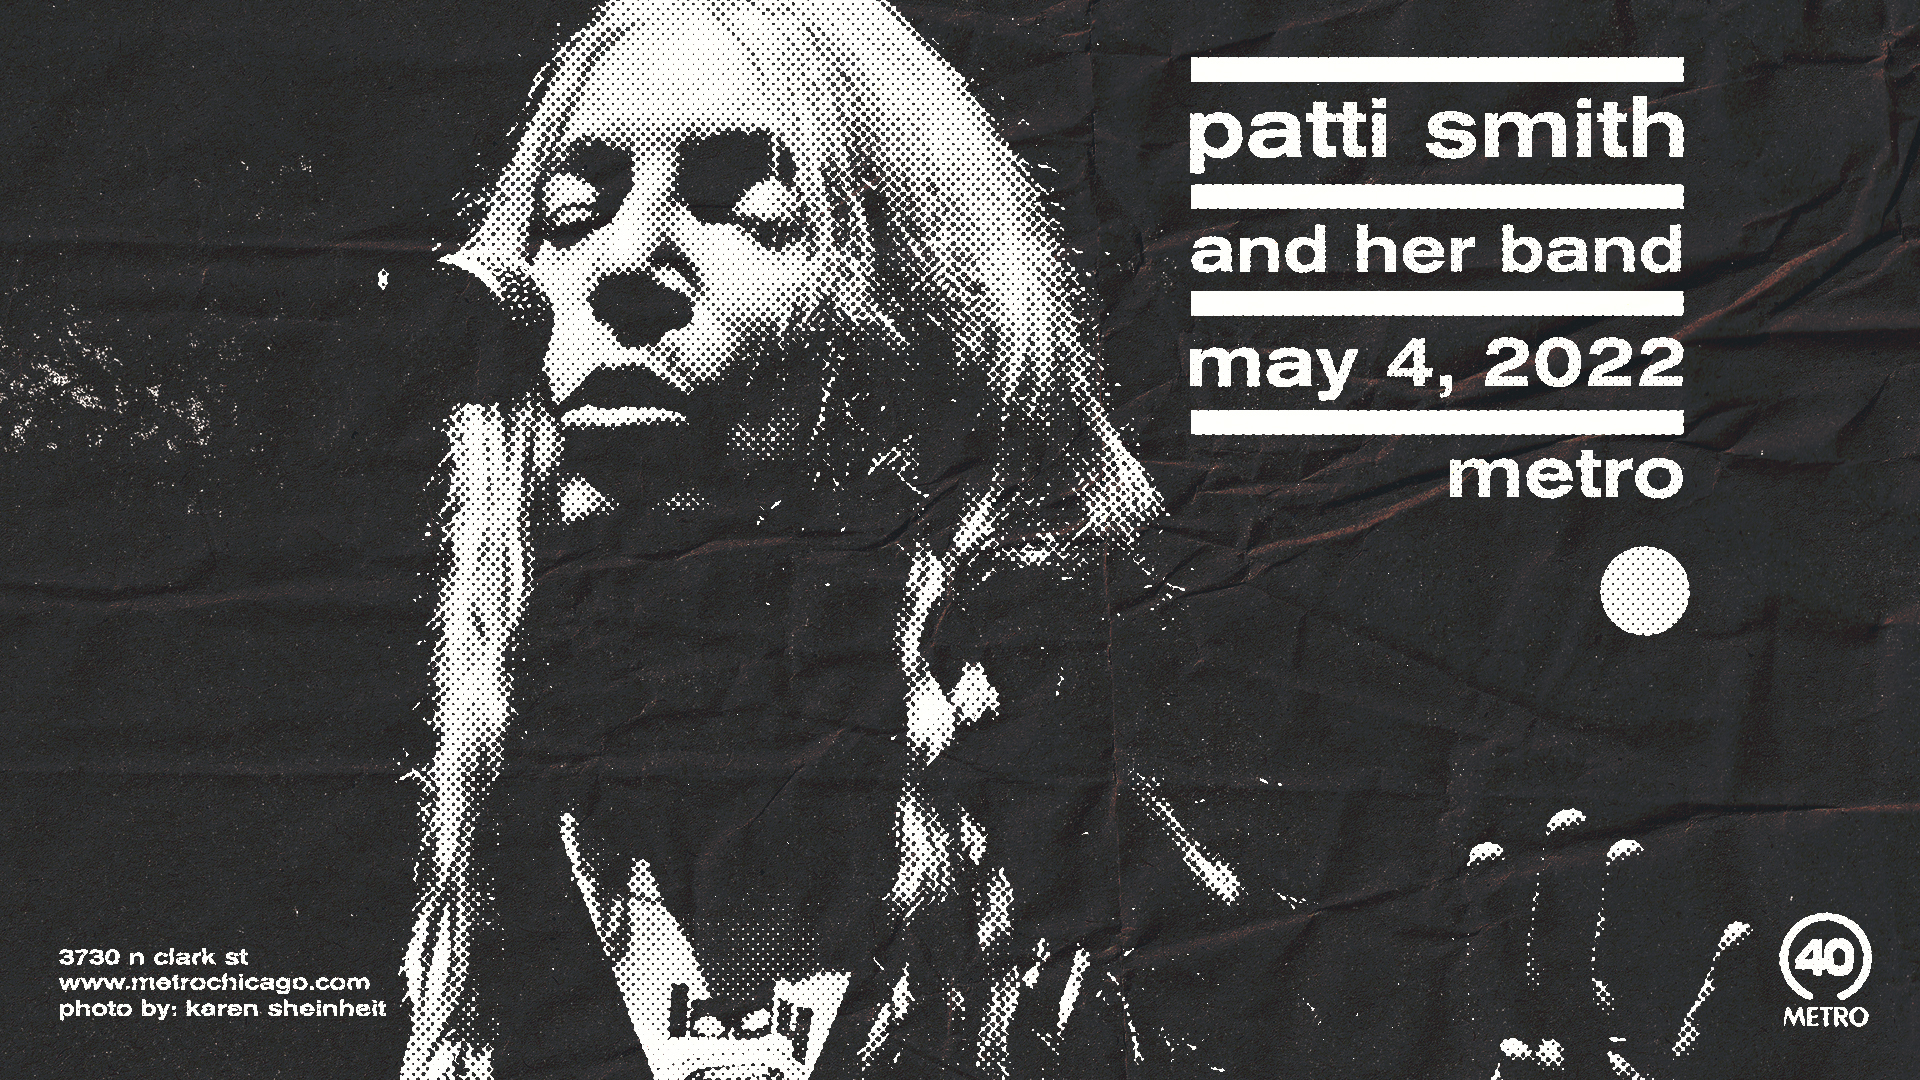 METRO Welcomes Patti Smith and Her Band For Special 40th Anniversary Performance